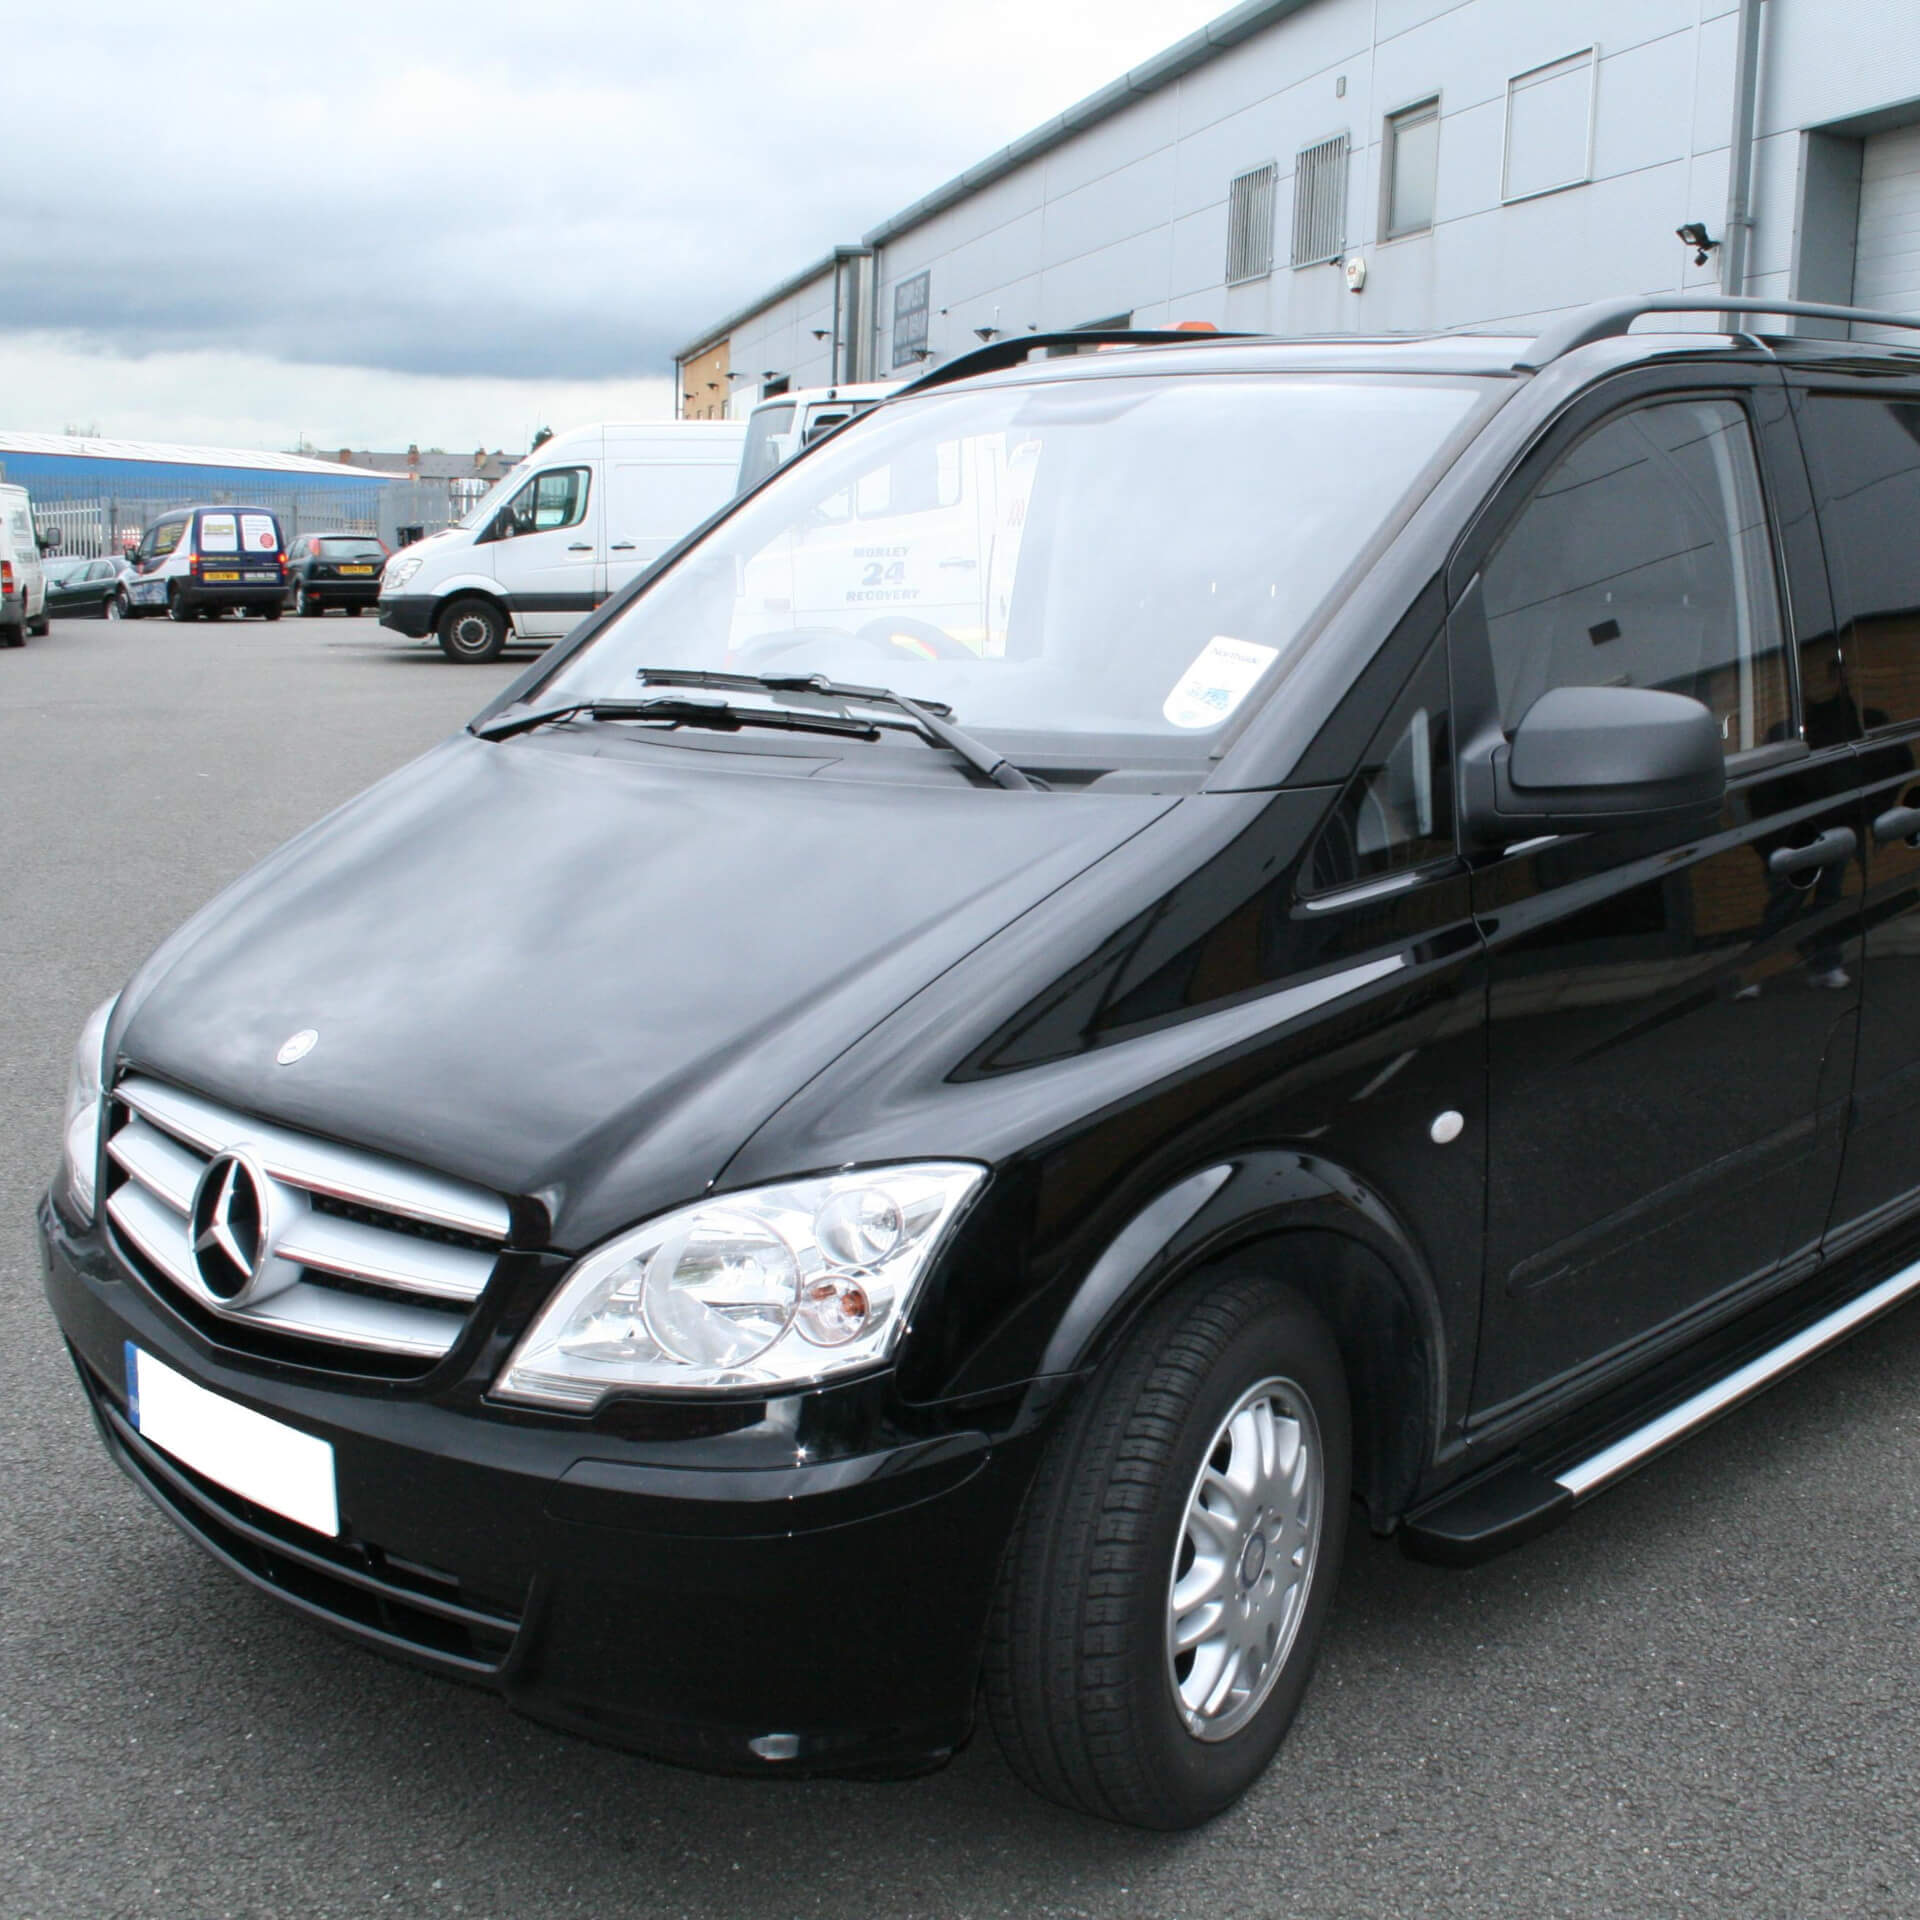 Direct4x4 accessories for Mercedes Vito/Viano vehicles with a photo of a black Mercedes Vito/Viano parked in a car park